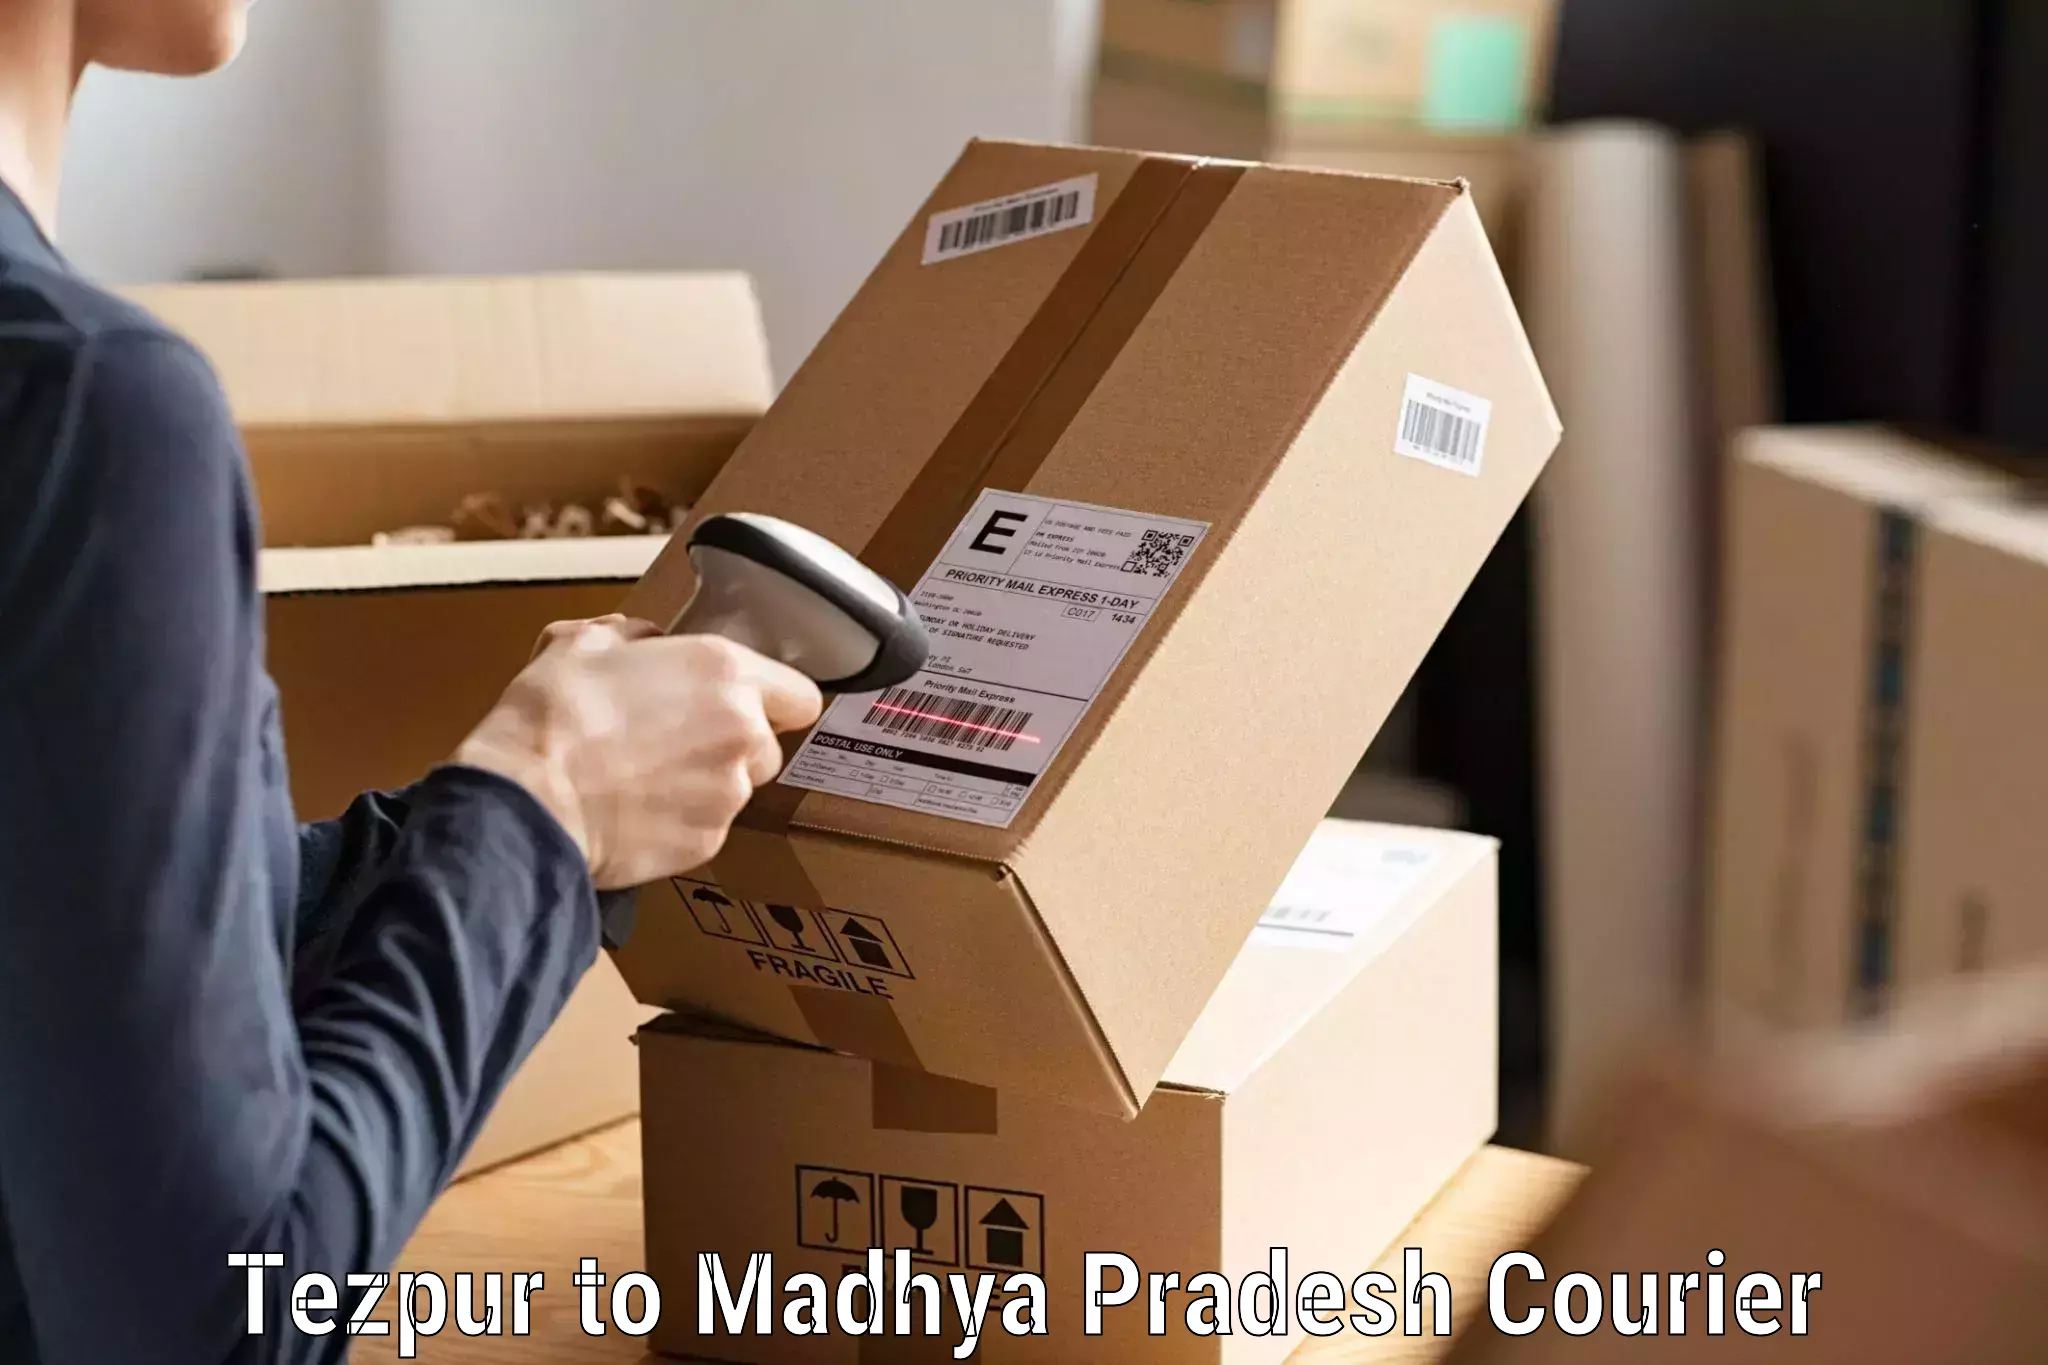 Rapid shipping services Tezpur to Betul